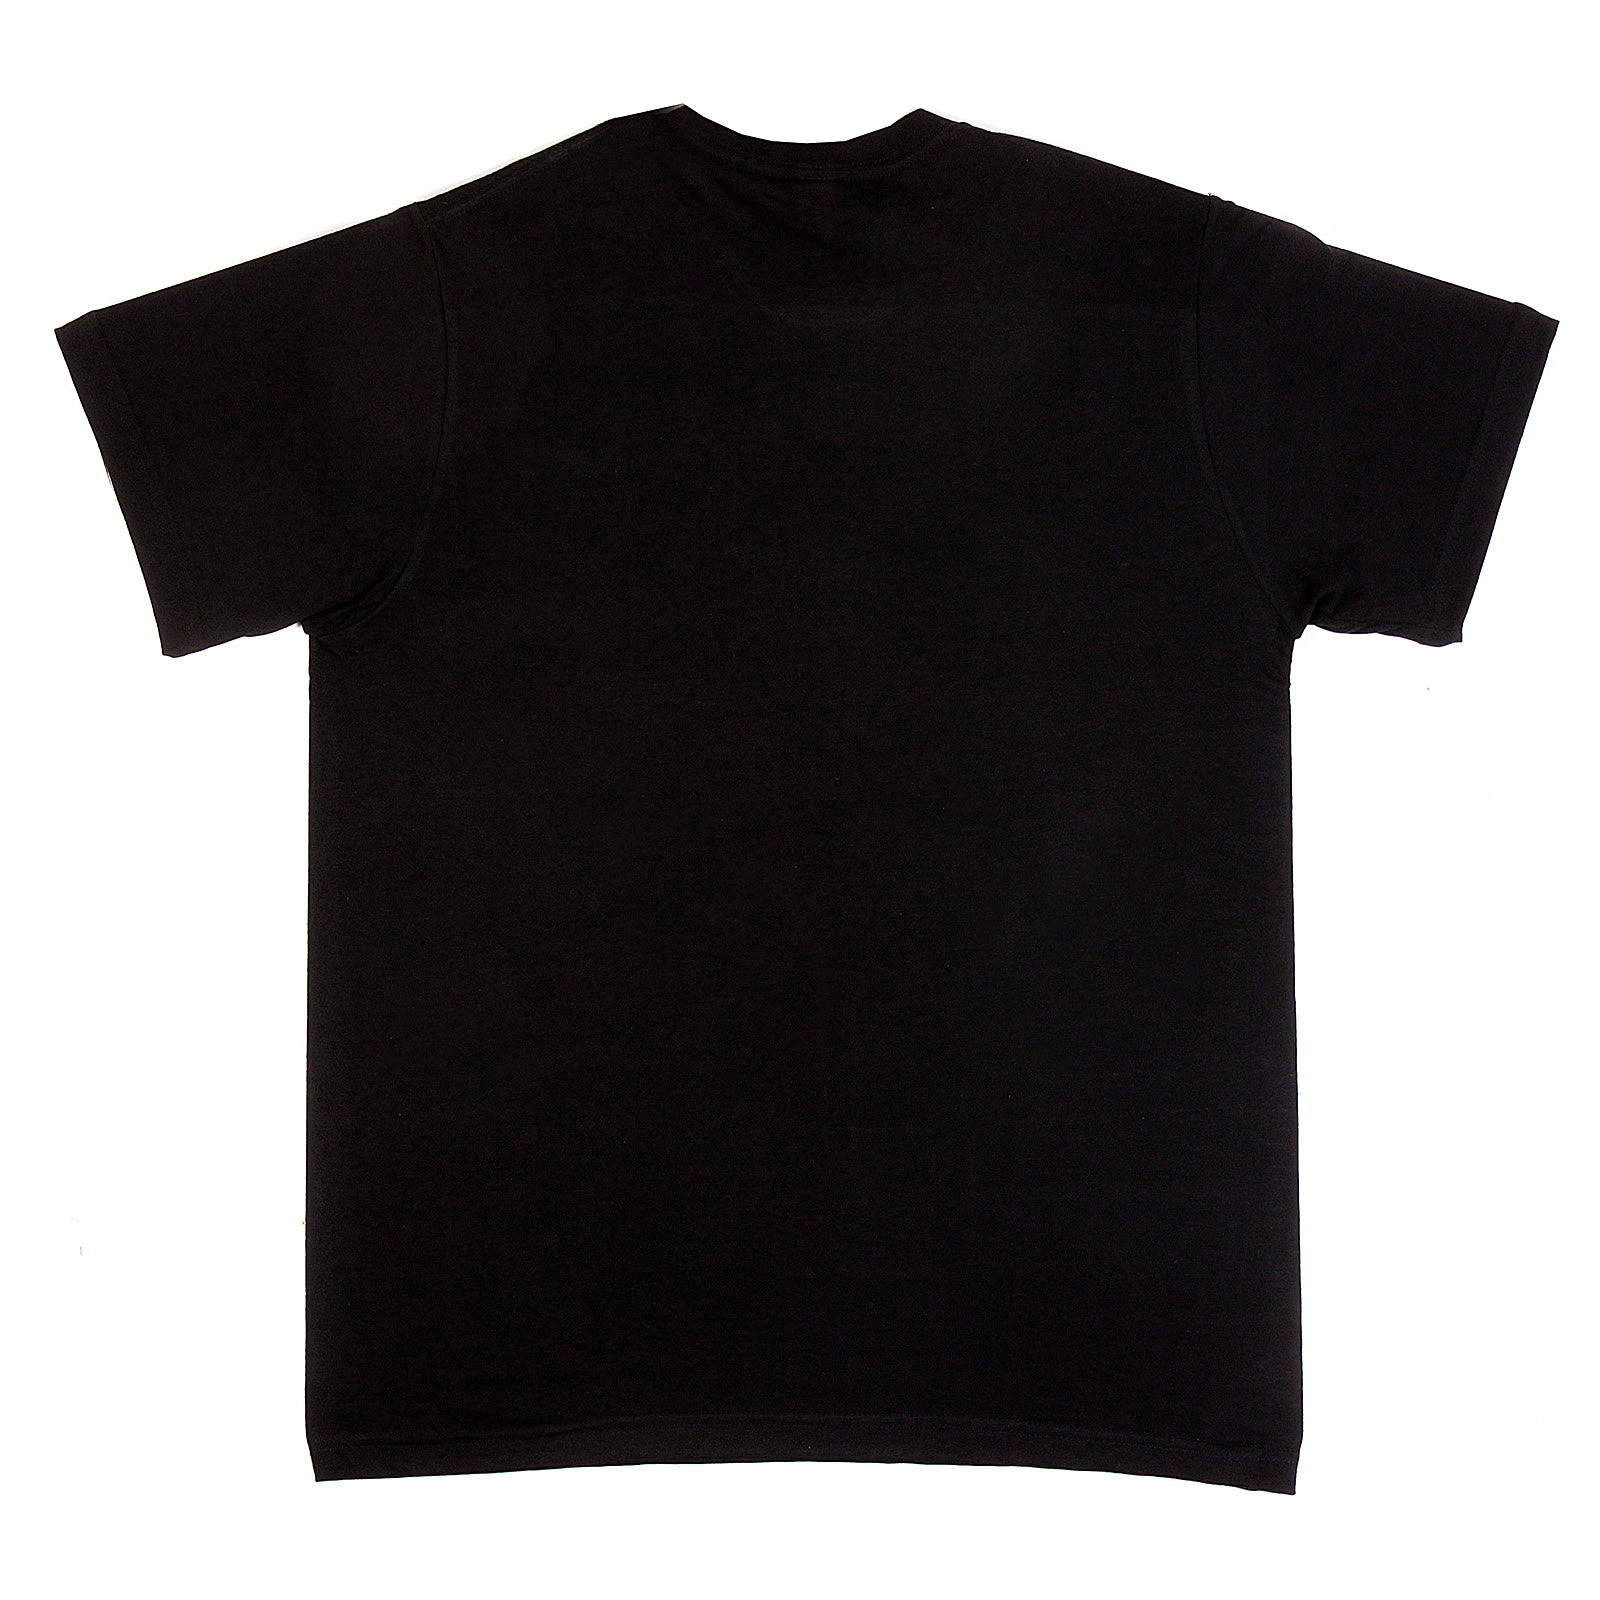 Images For > Black T Shirts Front And Back